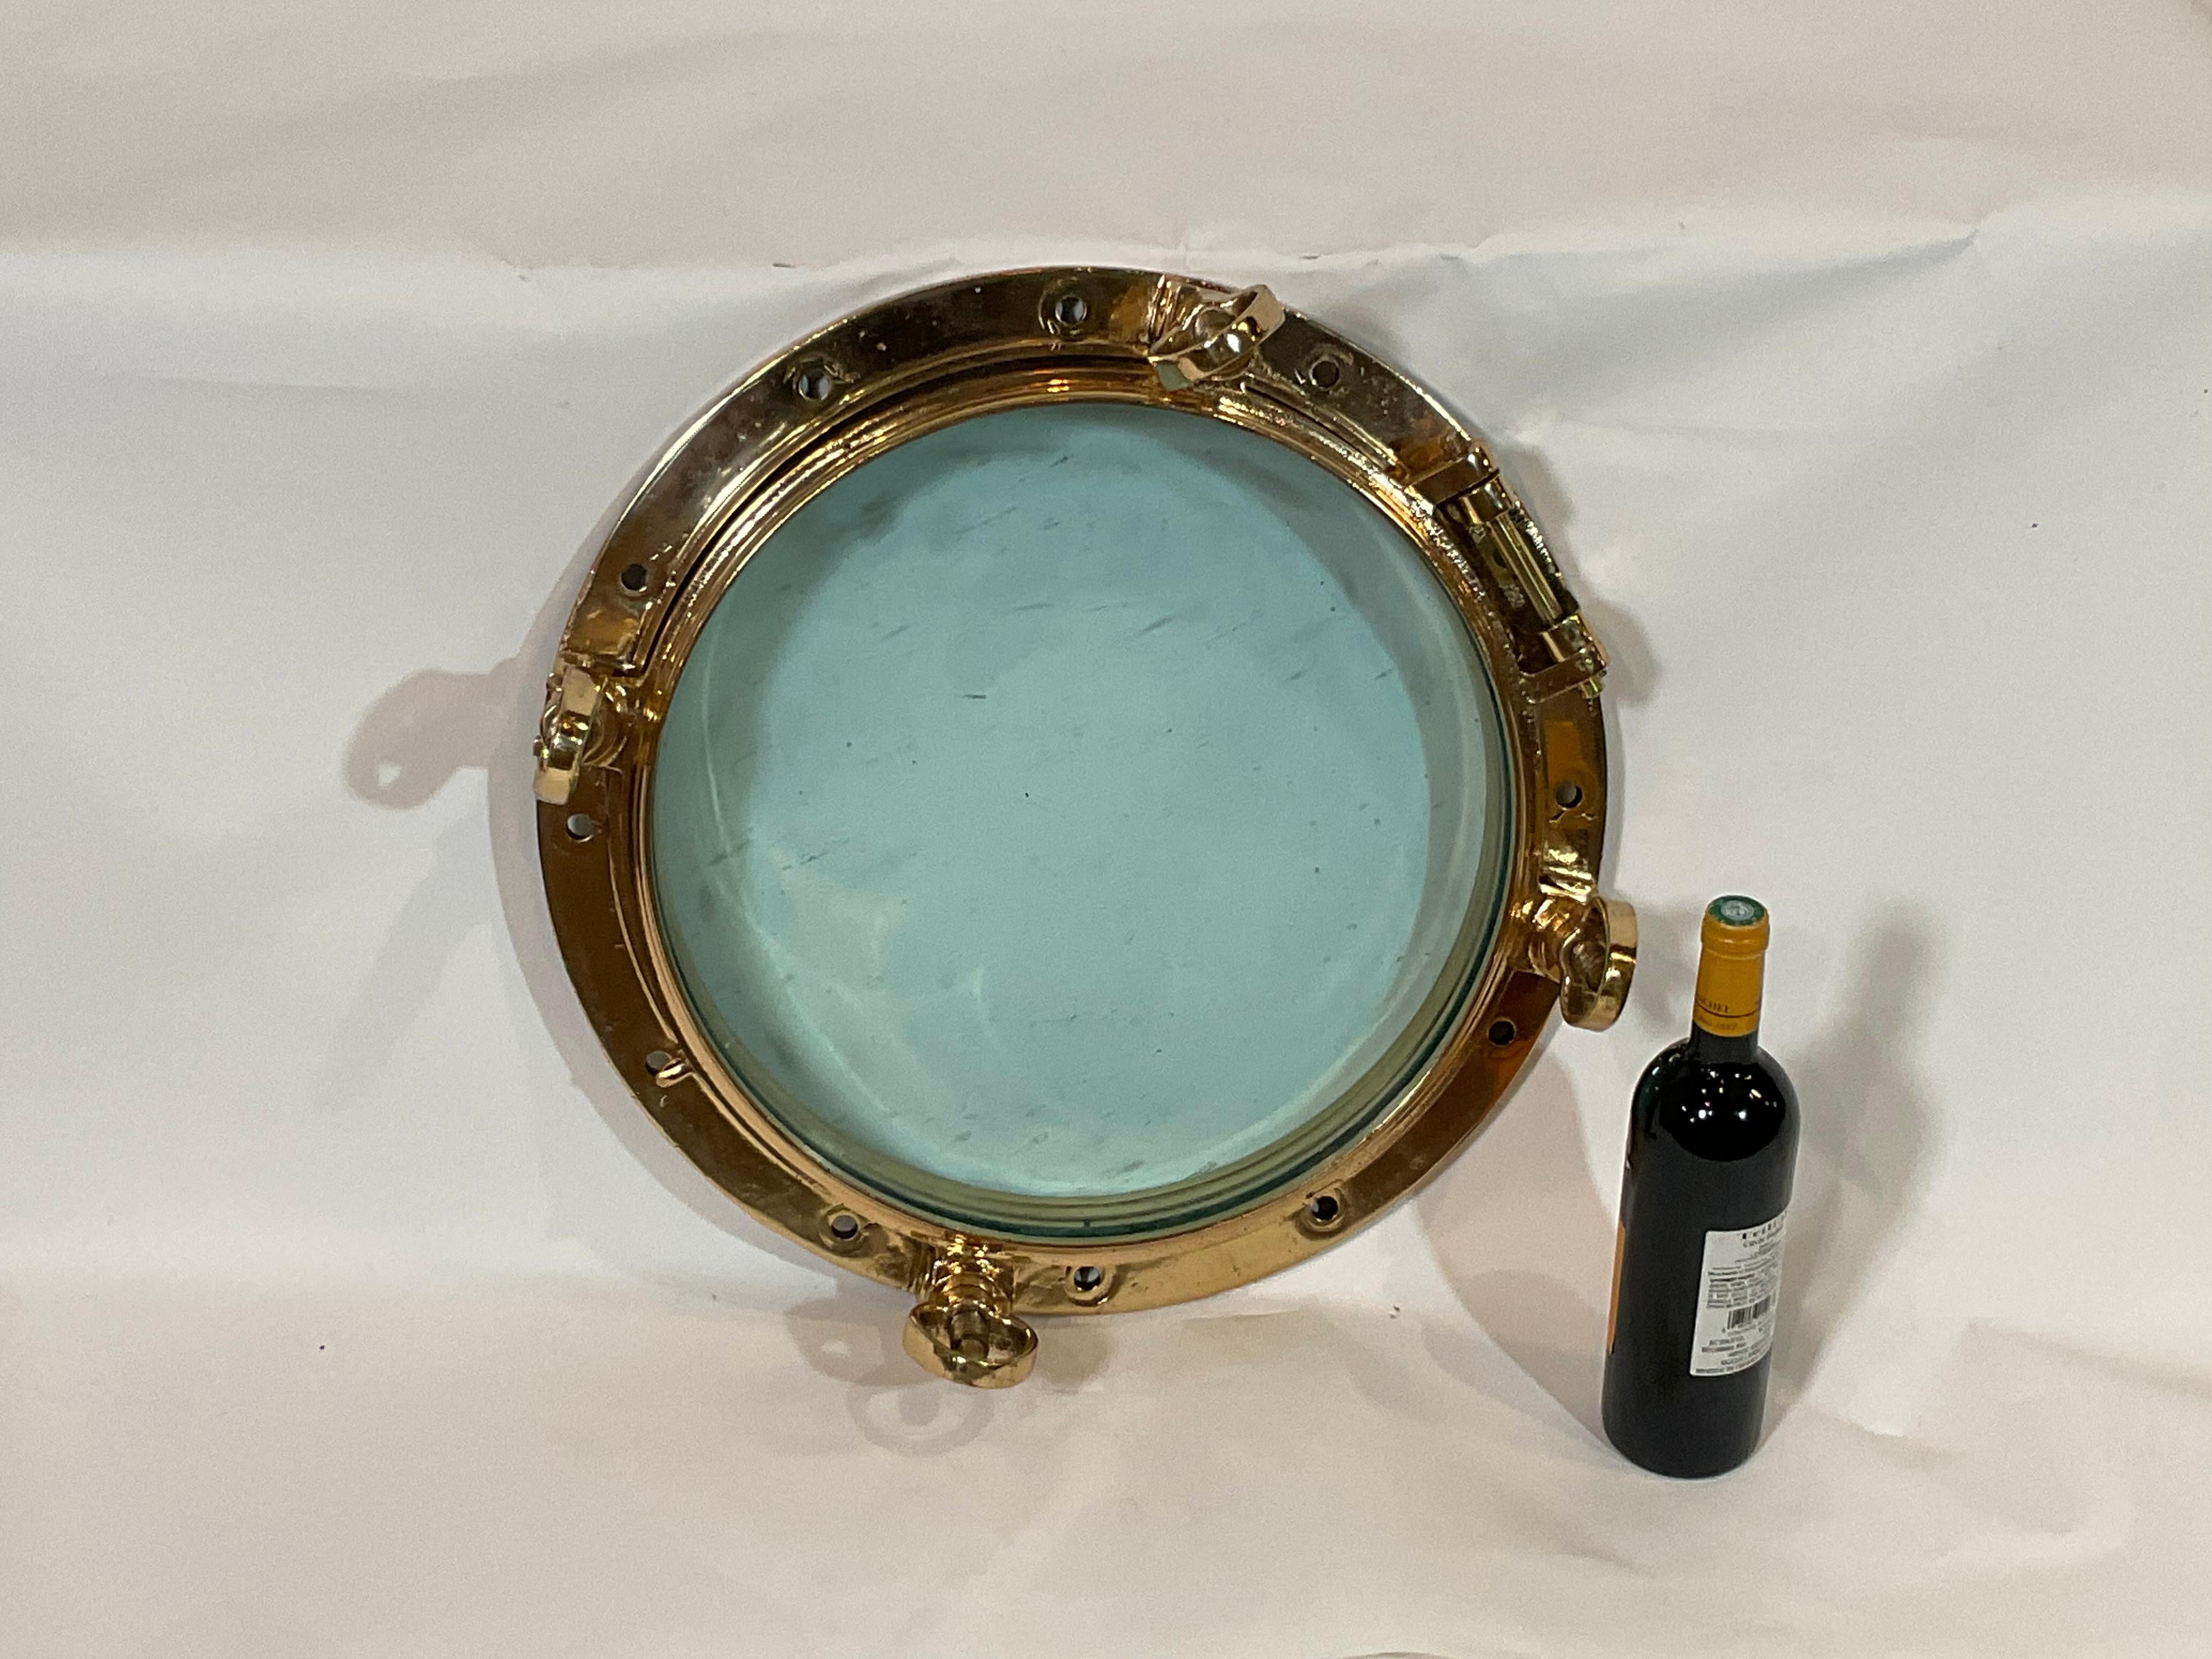 Highly polished ships porthole with hinged door and four dog bolts. Meticulously polished and lacquered. The tempered glass has some imperfections from years at sea. Large in size. Forty-seven pounds. 

Weight: 47 LBS
Overall Dimensions: 6”